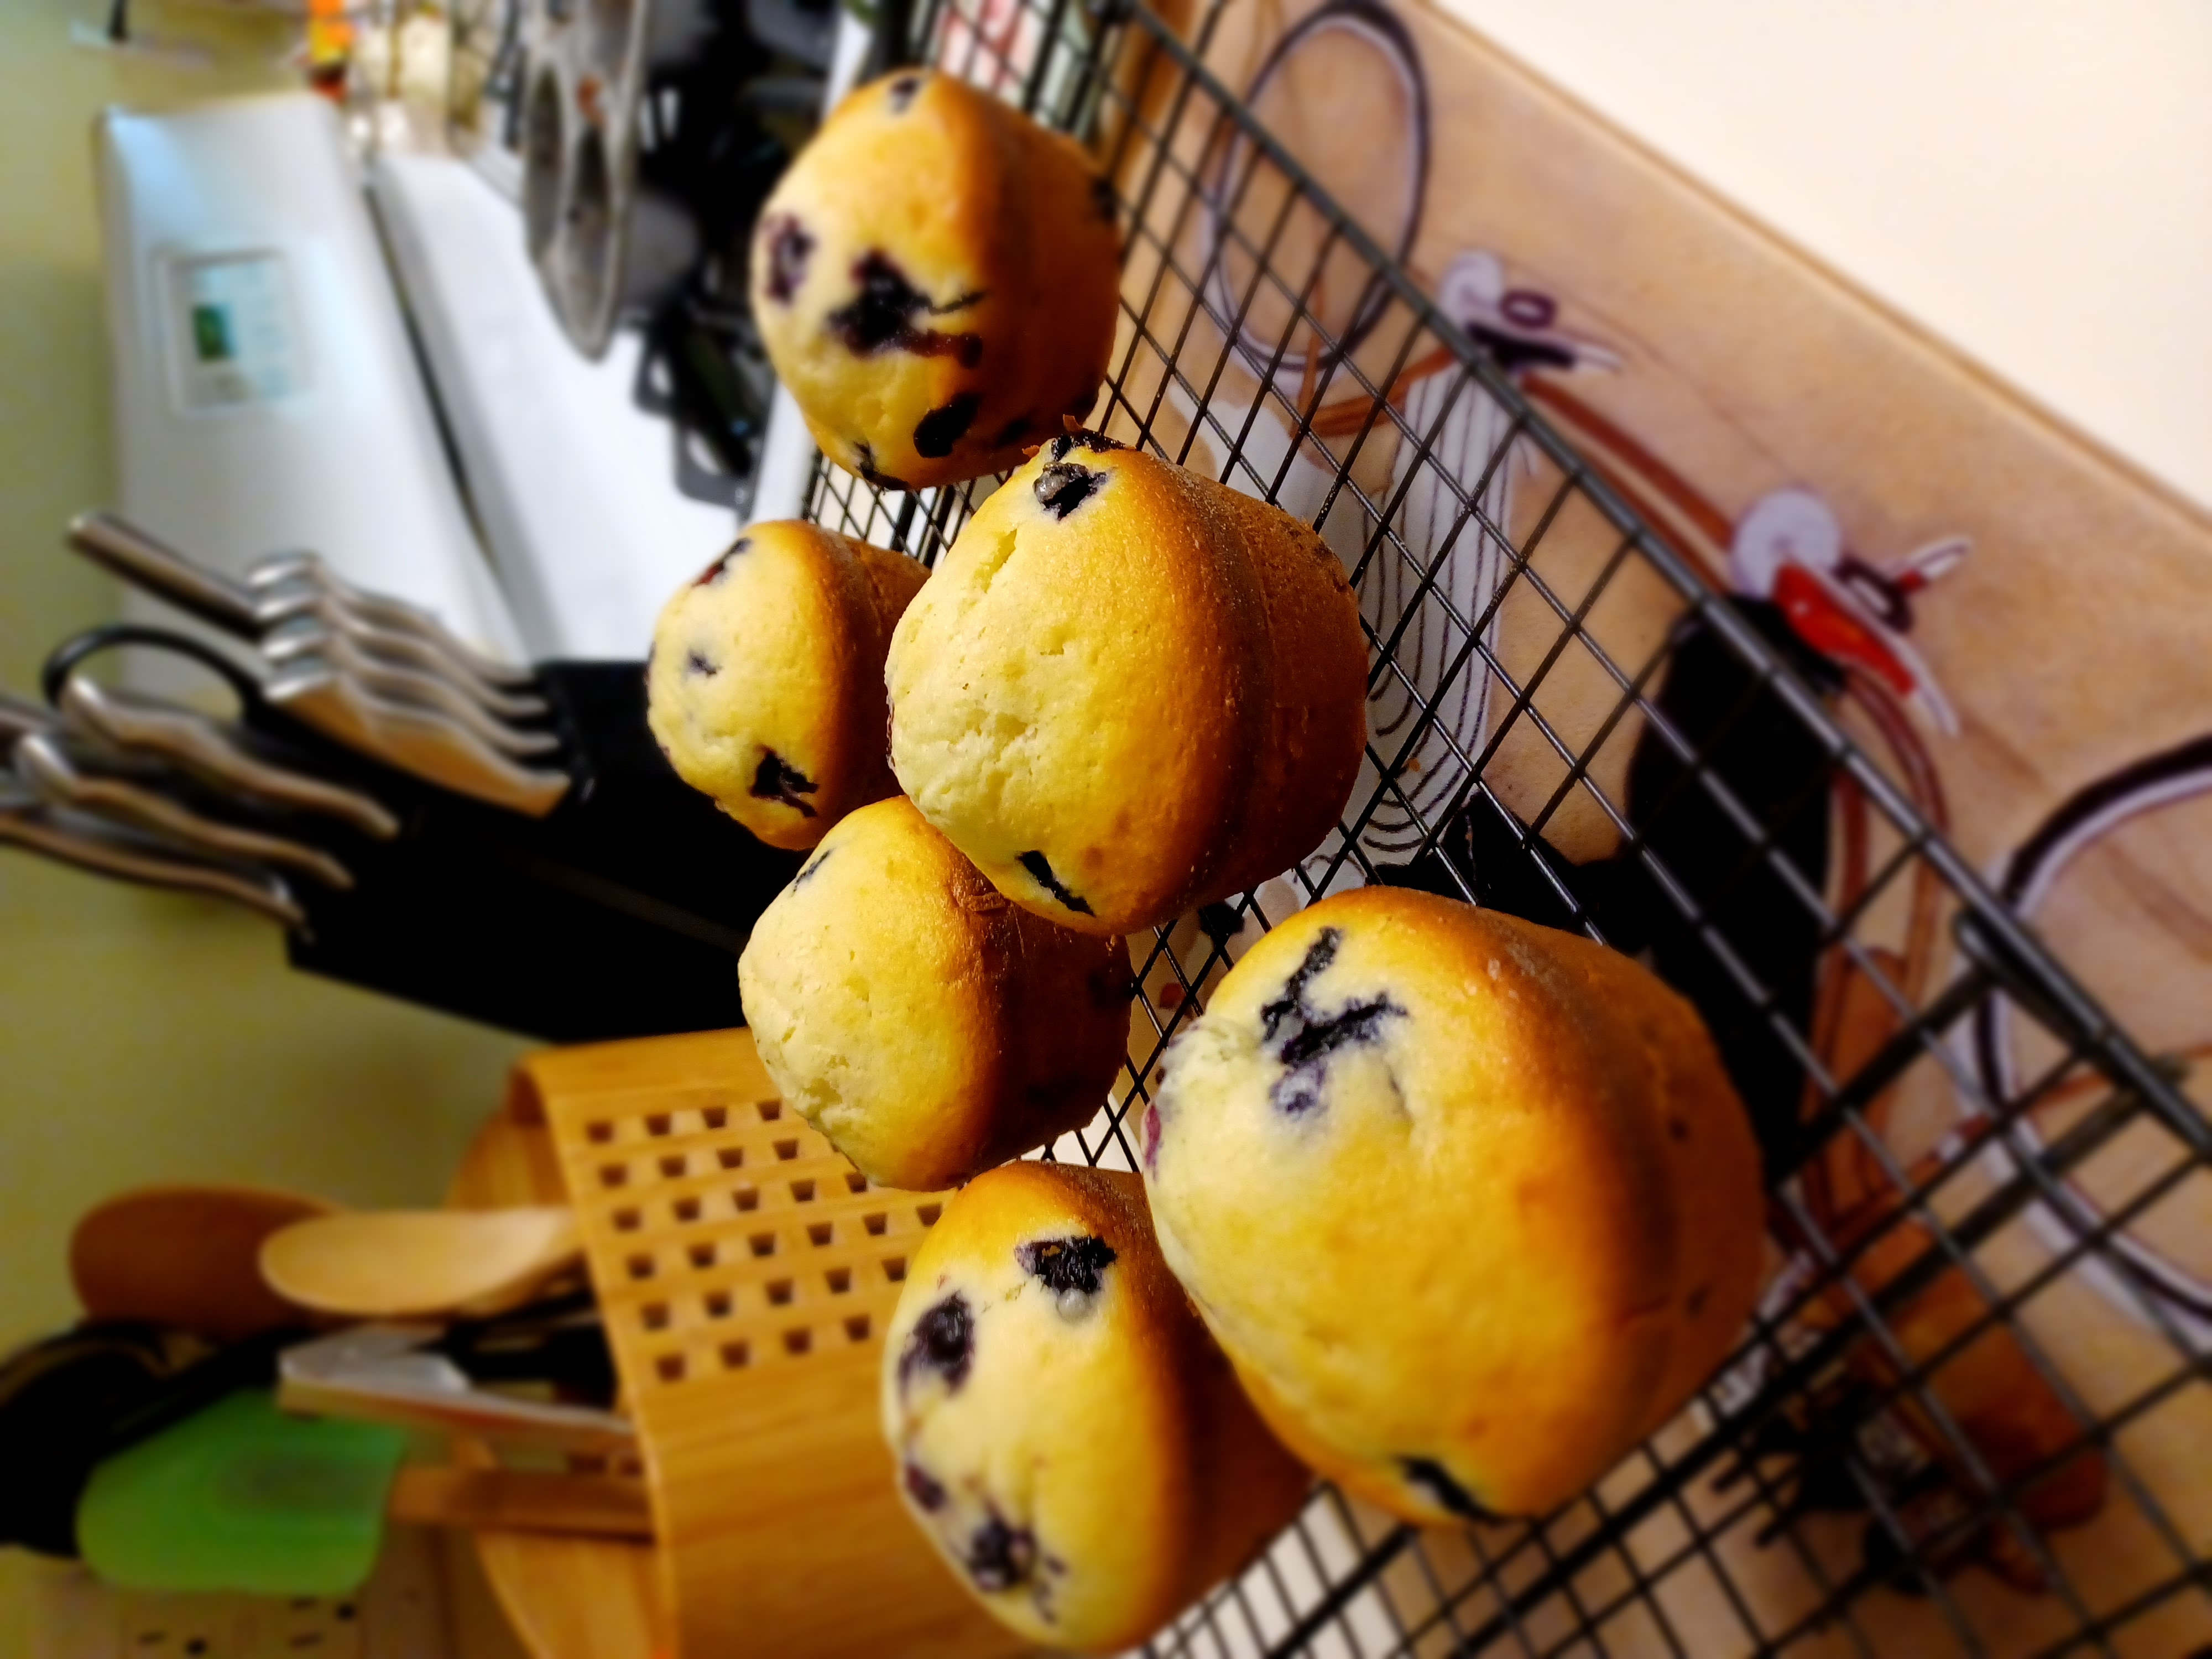 To Die For Blueberry Muffins Allrecipes Member